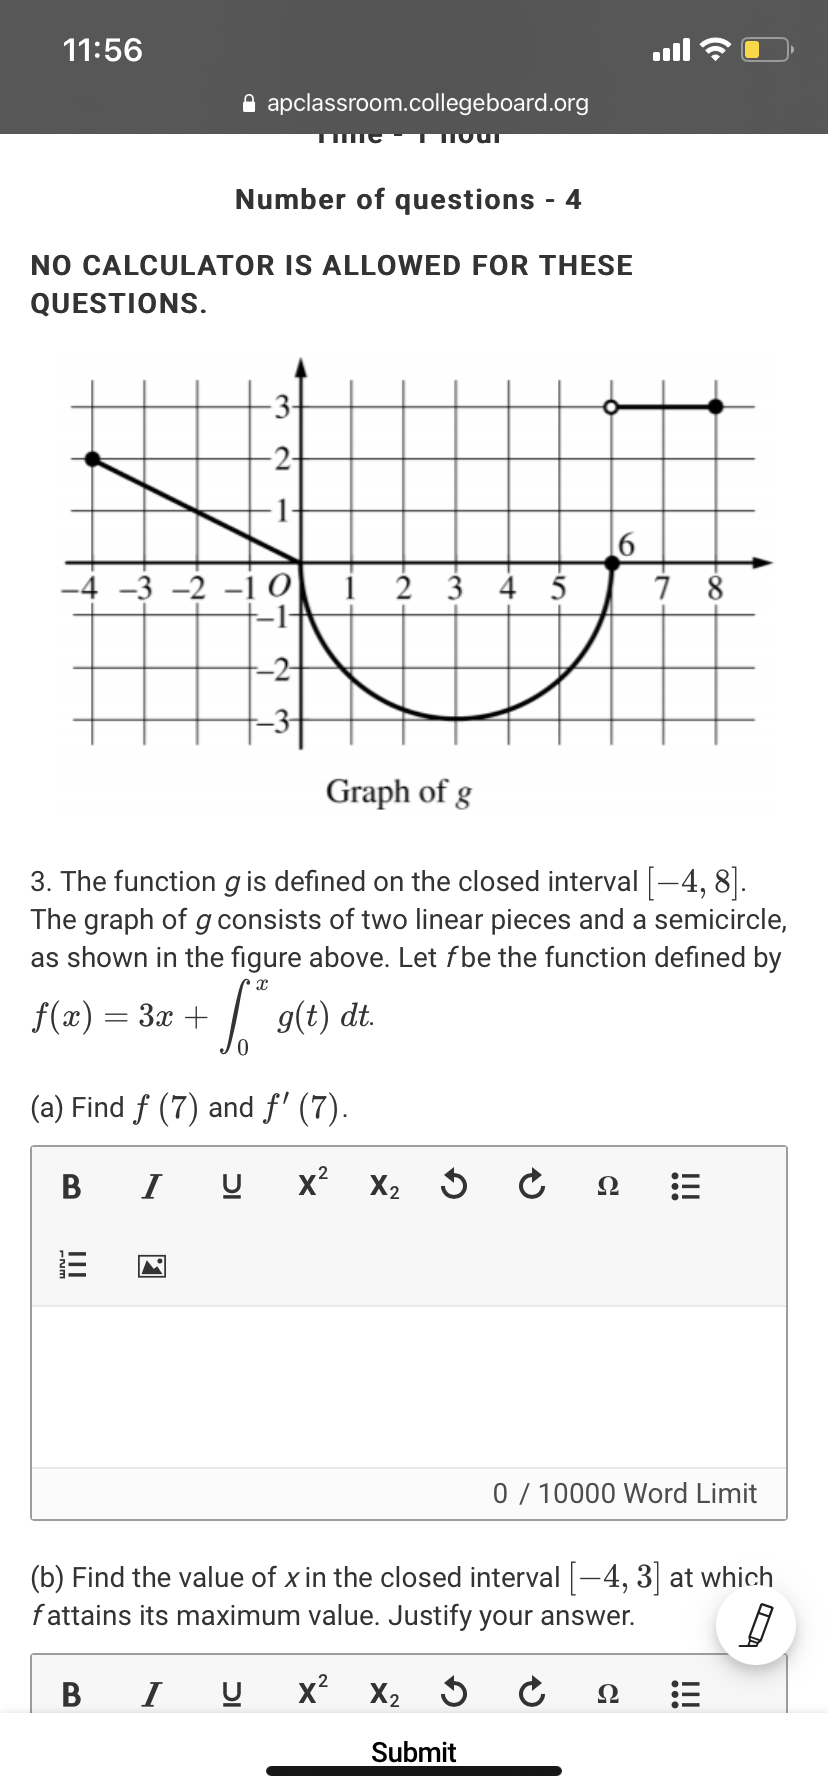 11:56
A apclassroom.collegeboard.org
Number of questions - 4
NO CALCULATOR IS ALLOWED FOR THESE
QUESTIONS.
-3-
-2-
1-
-4 -3 -2 -1 O i 2 3 4 5
-1-
-2-
Graph of g
3. The function g is defined on the closed interval [-4, 8].
The graph of gconsists of two linear pieces and a semicircle,
as shown in the figure above. Let fbe the function defined by
f(x) = 3x +
g(t) d.
(a) Find f (7) and f' (7).
B
I
x? X2
Ω
0 / 10000 Word Limit
(b) Find the value of x in the closed interval -4, 3] at which
fattains its maximum value. Justify your answer.
I
x?
X2
Ω
Submit
!!!
II
